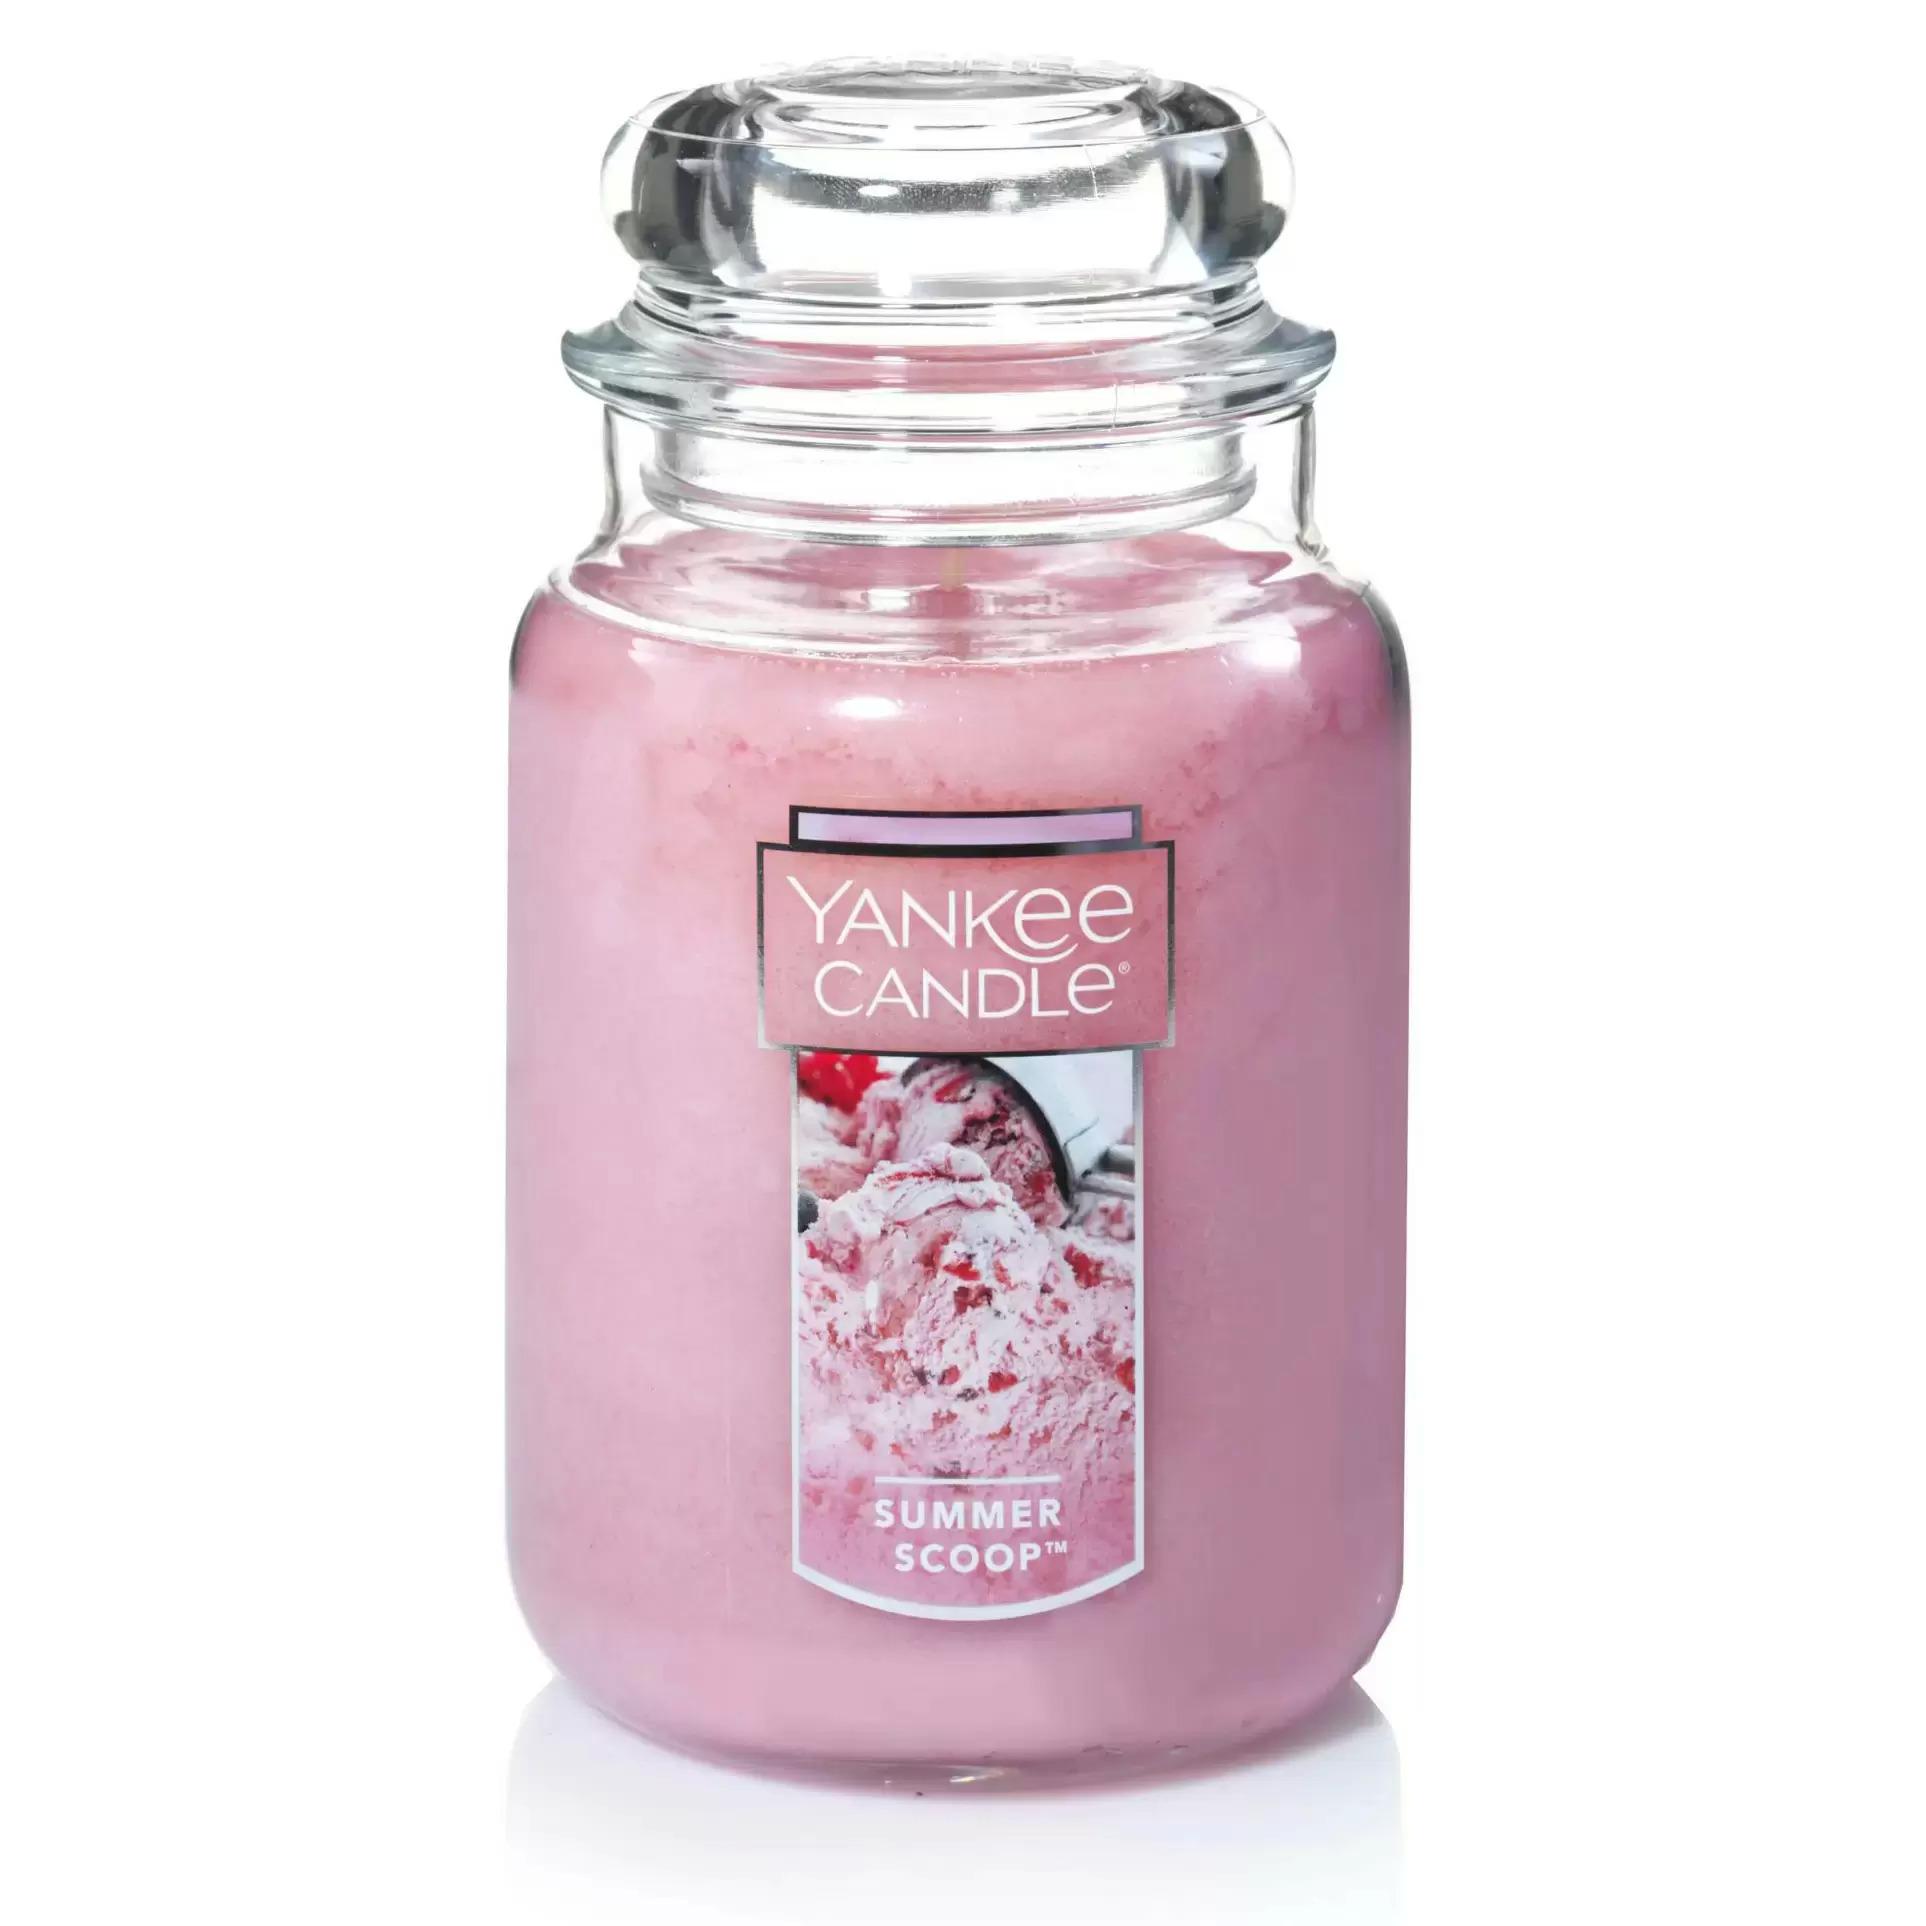 5 Yankee Candle Original Large Jar Candles for $53.12 Shipped